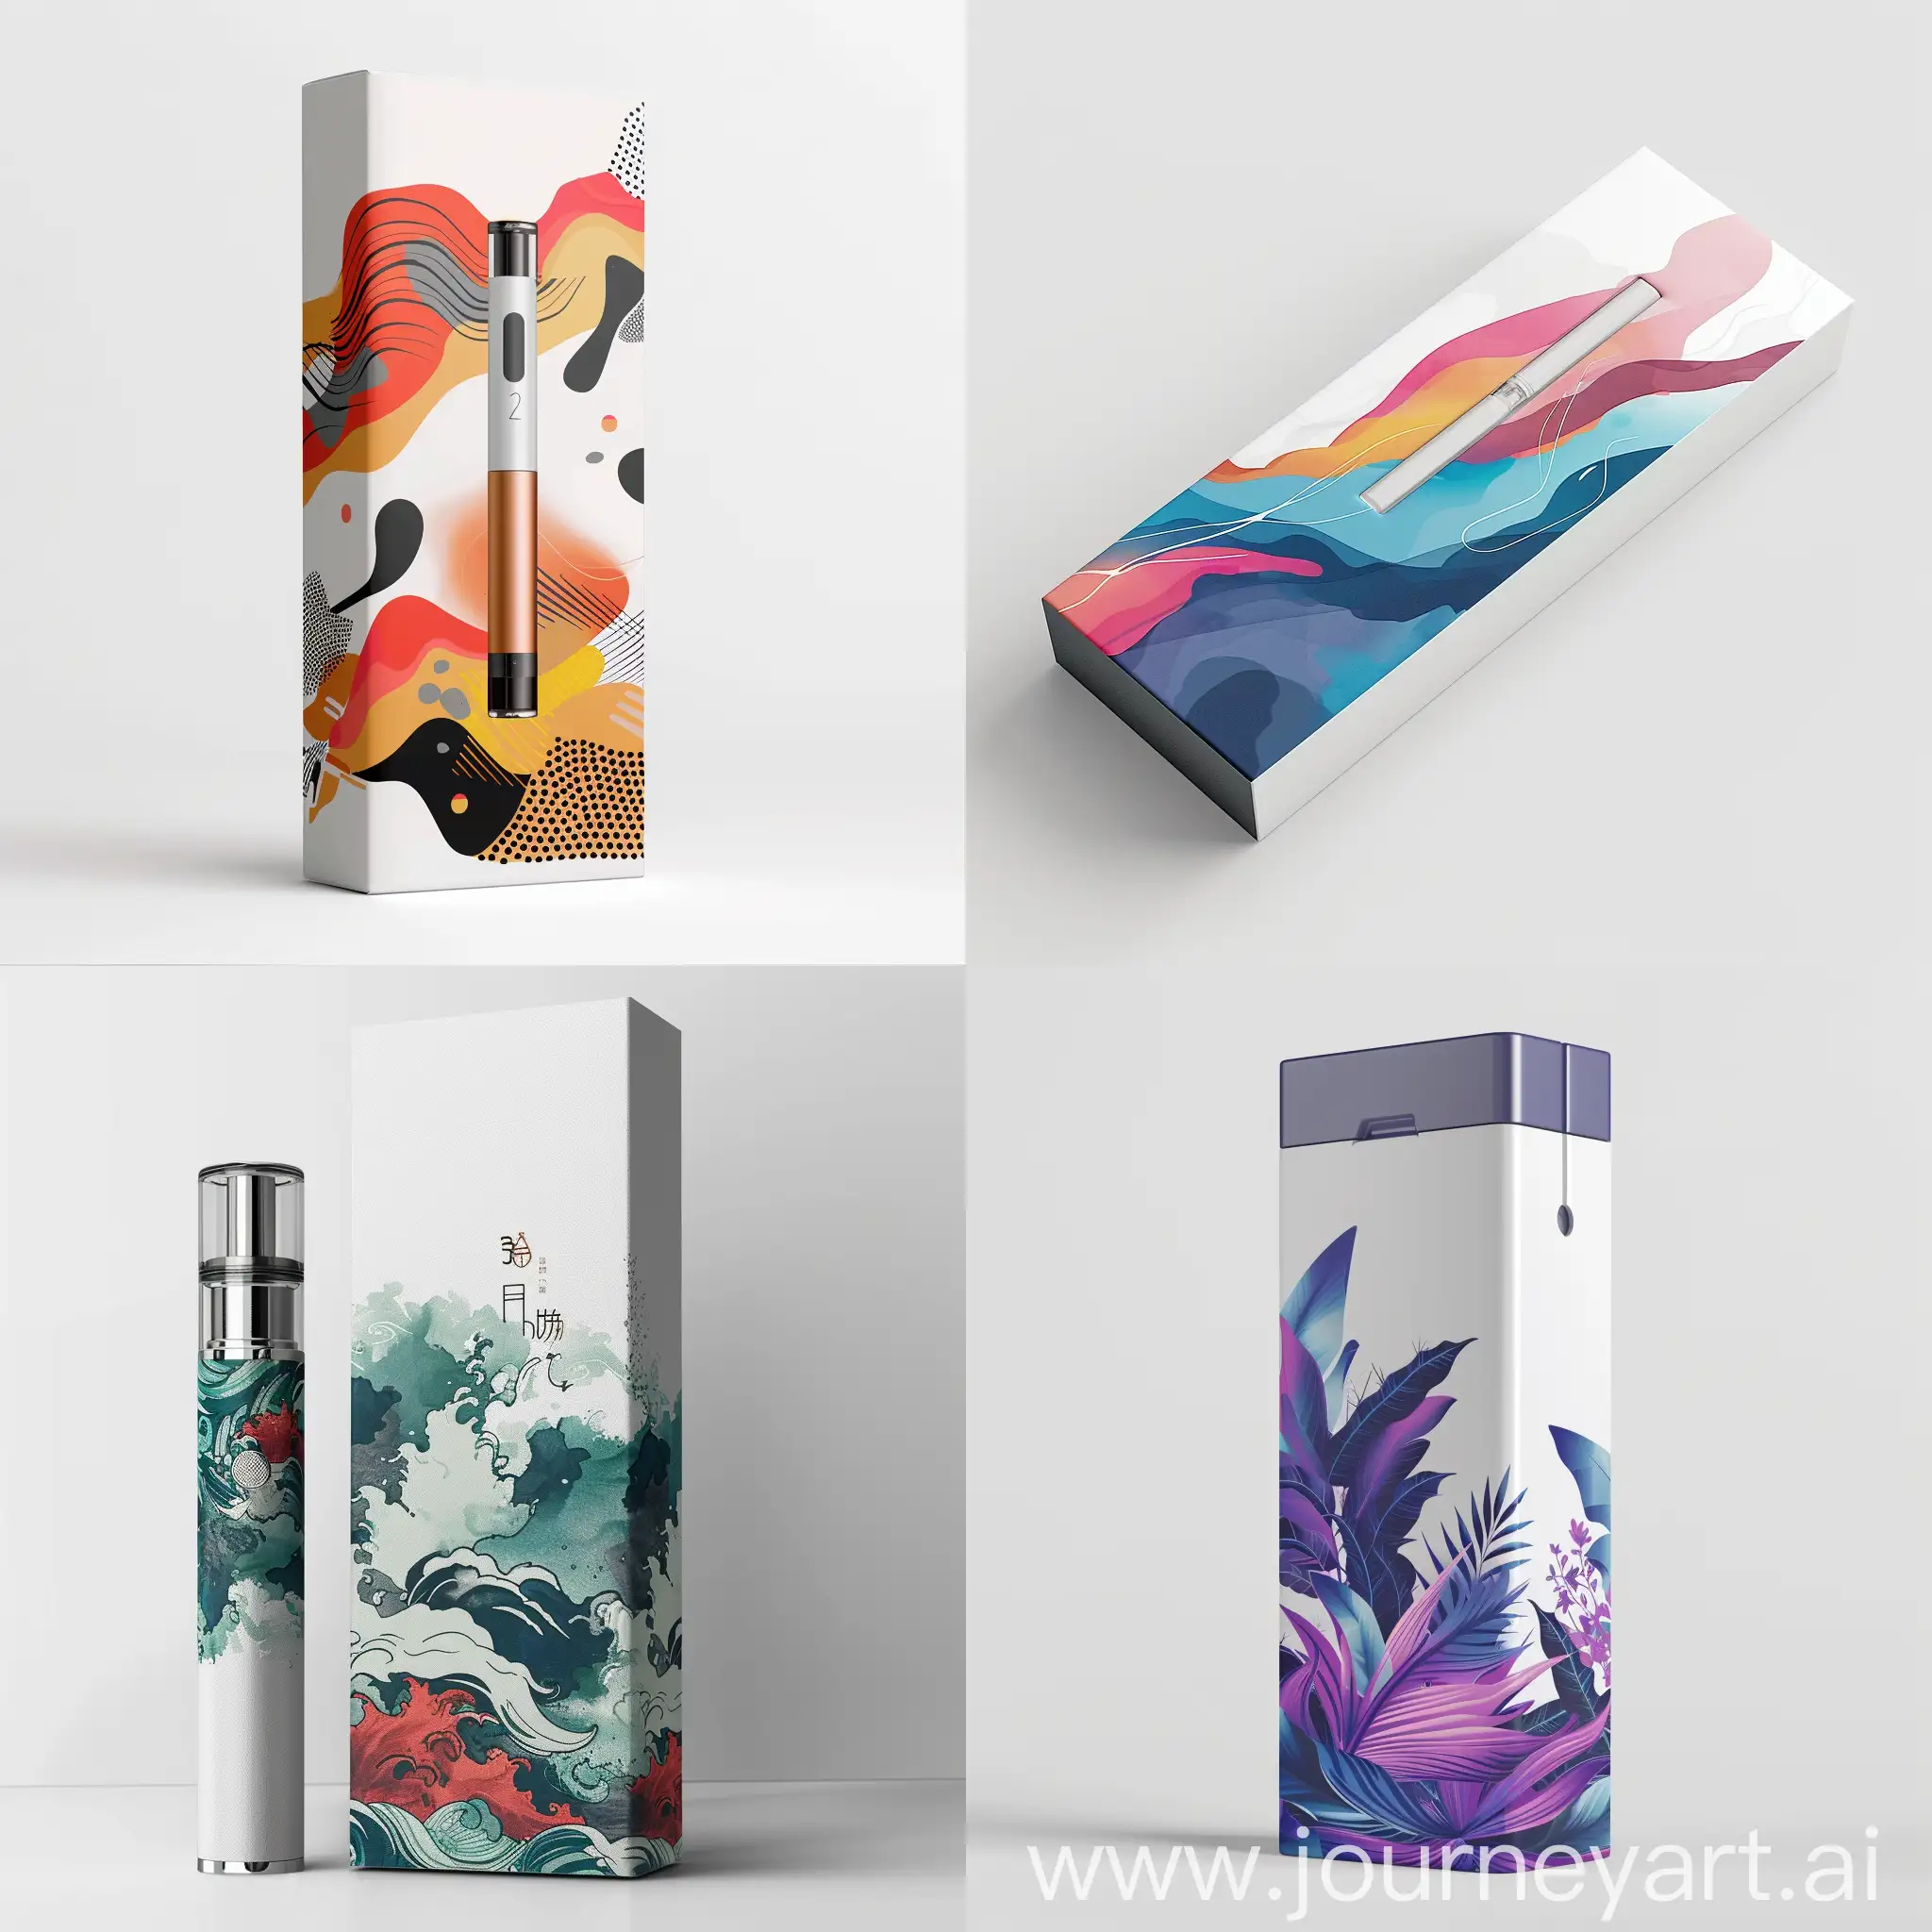 design the box in white background style for vape disposable product